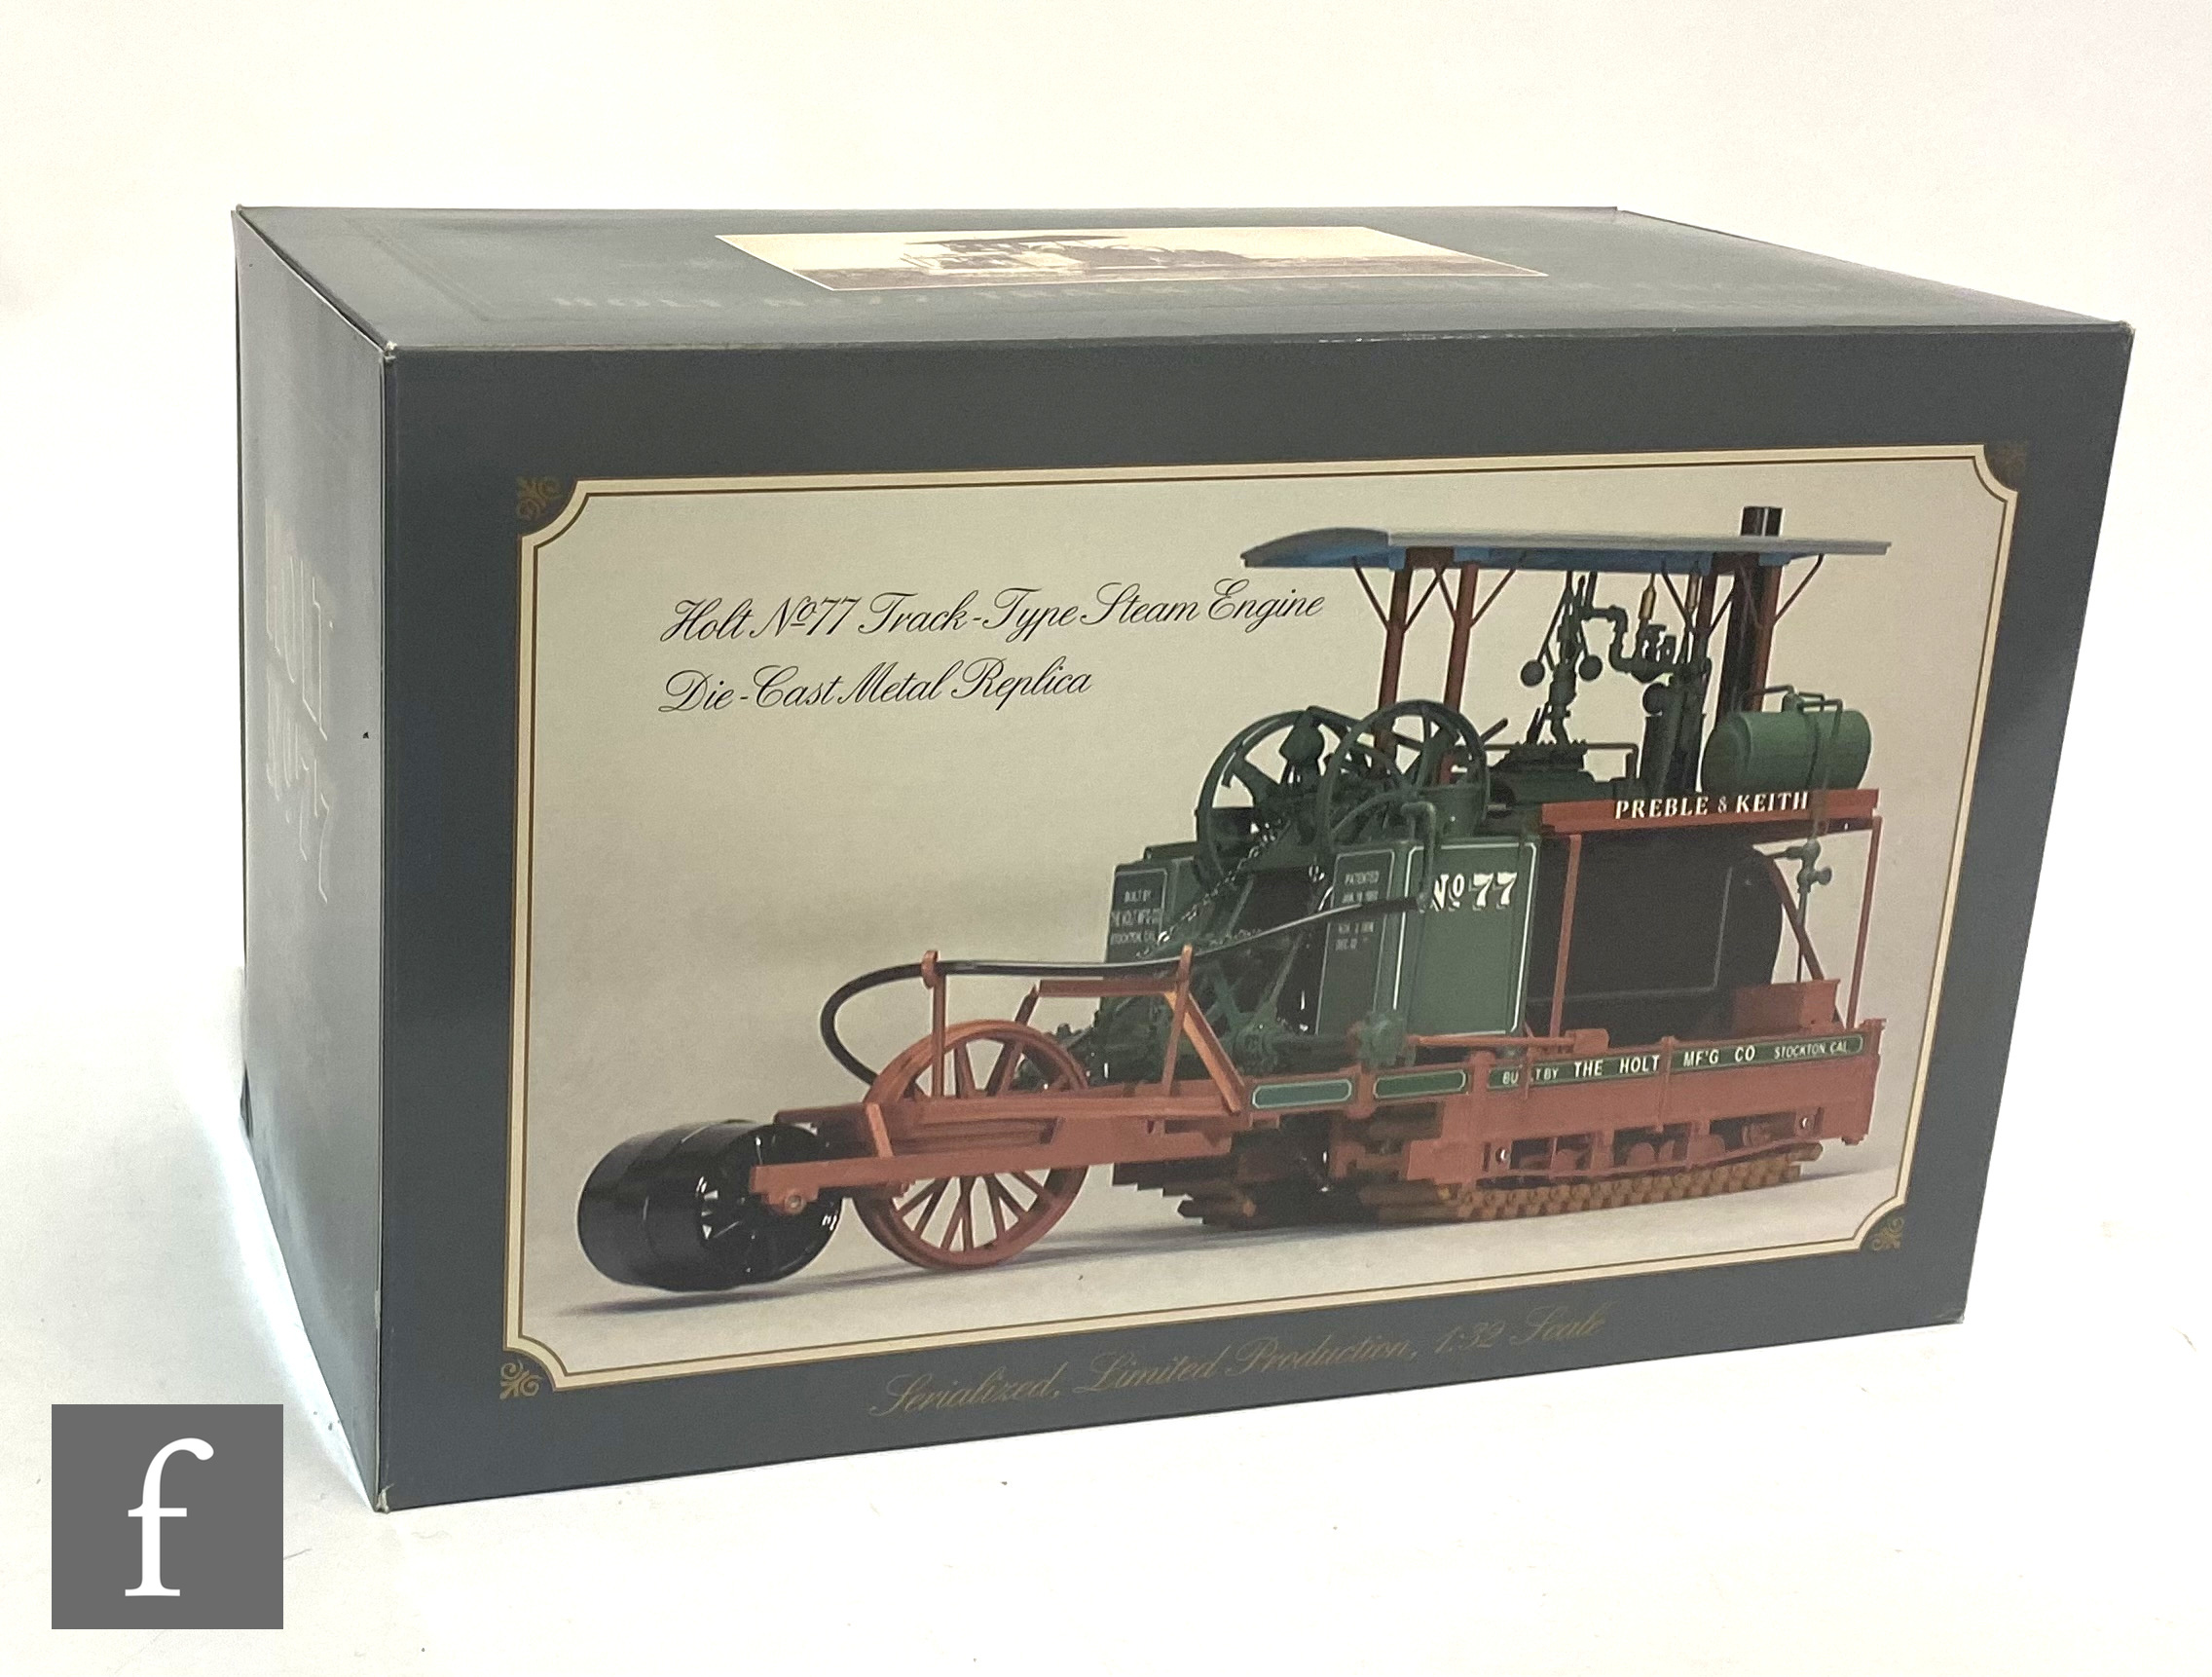 A Spec Cast 1:32 scale Holt No. 77 Track Type Steam Engine diecast model, limited edition 637 of